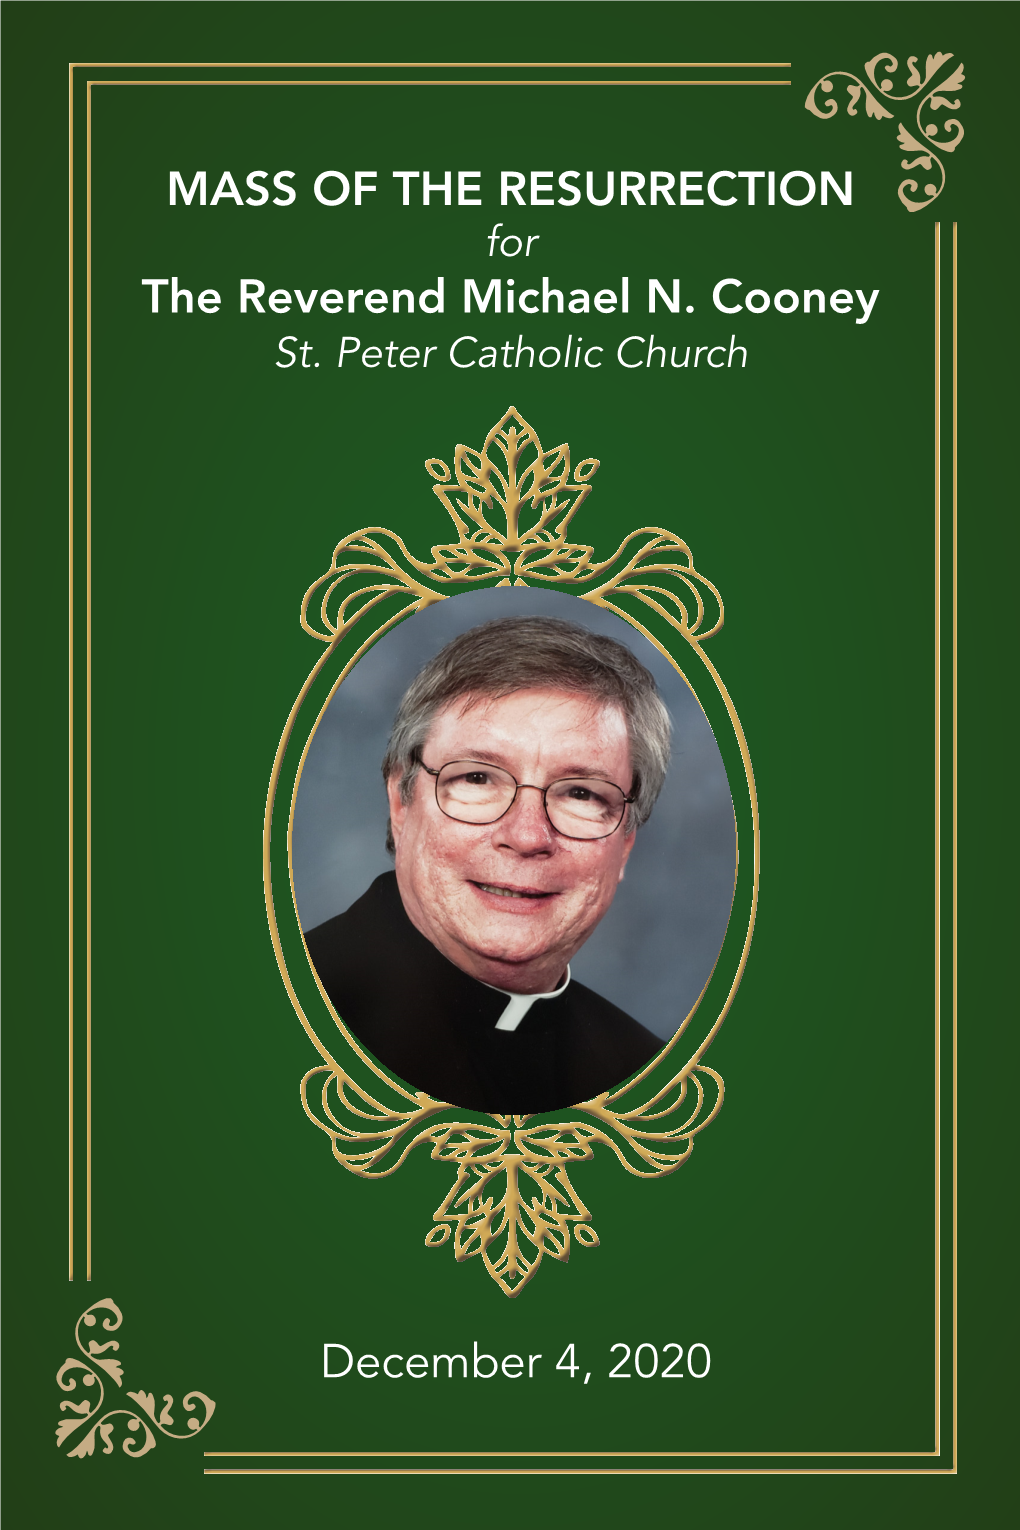 MASS of the RESURRECTION the Reverend Michael N. Cooney